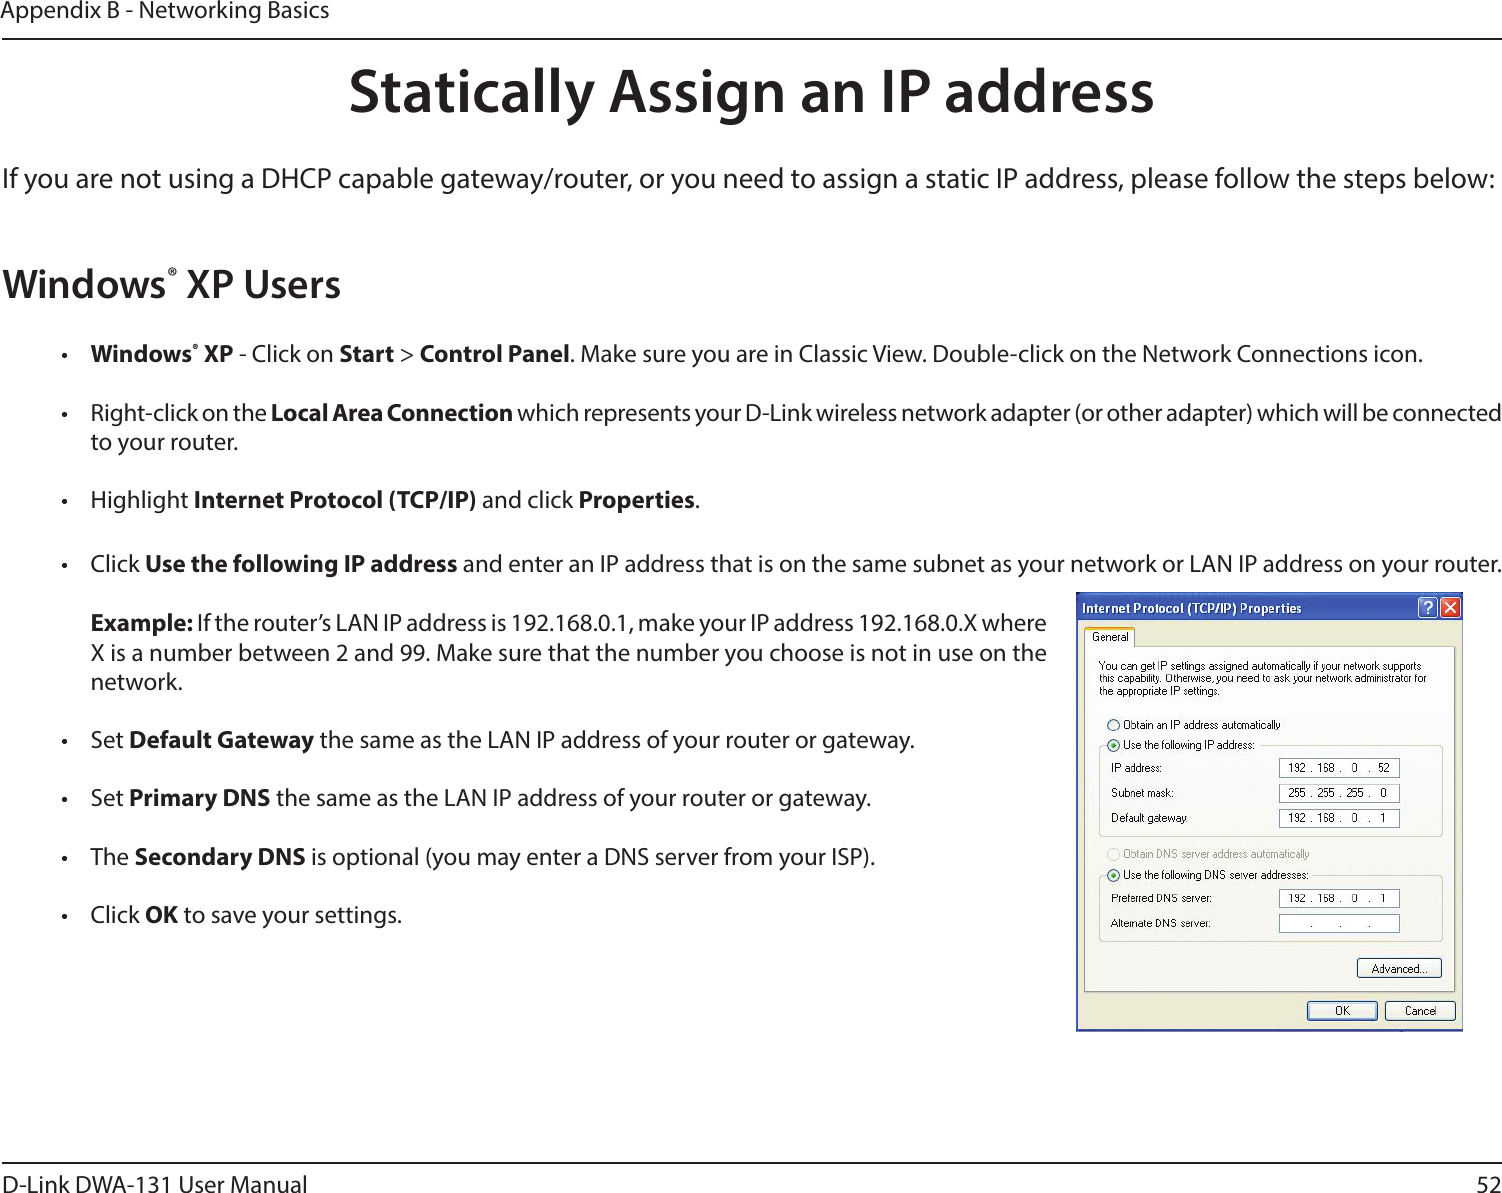 52D-Link DWA-131 User ManualAppendix B - Networking BasicsStatically Assign an IP addressIf you are not using a DHCP capable gateway/router, or you need to assign a static IP address, please follow the steps below:Windows® XP Users•  Windows® XP - Click on Start &gt; Control Panel. Make sure you are in Classic View. Double-click on the Network Connections icon.•  Right-click on the Local Area Connection which represents your D-Link wireless network adapter (or other adapter) which will be connected to your router.•  Highlight Internet Protocol (TCP/IP) and click Properties.•  Click Use the following IP address and enter an IP address that is on the same subnet as your network or LAN IP address on your router. Example: If the router’s LAN IP address is 192.168.0.1, make your IP address 192.168.0.X where X is a number between 2 and 99. Make sure that the number you choose is not in use on the network. •  Set Default Gateway the same as the LAN IP address of your router or gateway.•  Set Primary DNS the same as the LAN IP address of your router or gateway. •  The Secondary DNS is optional (you may enter a DNS server from your ISP).•  Click OK to save your settings.